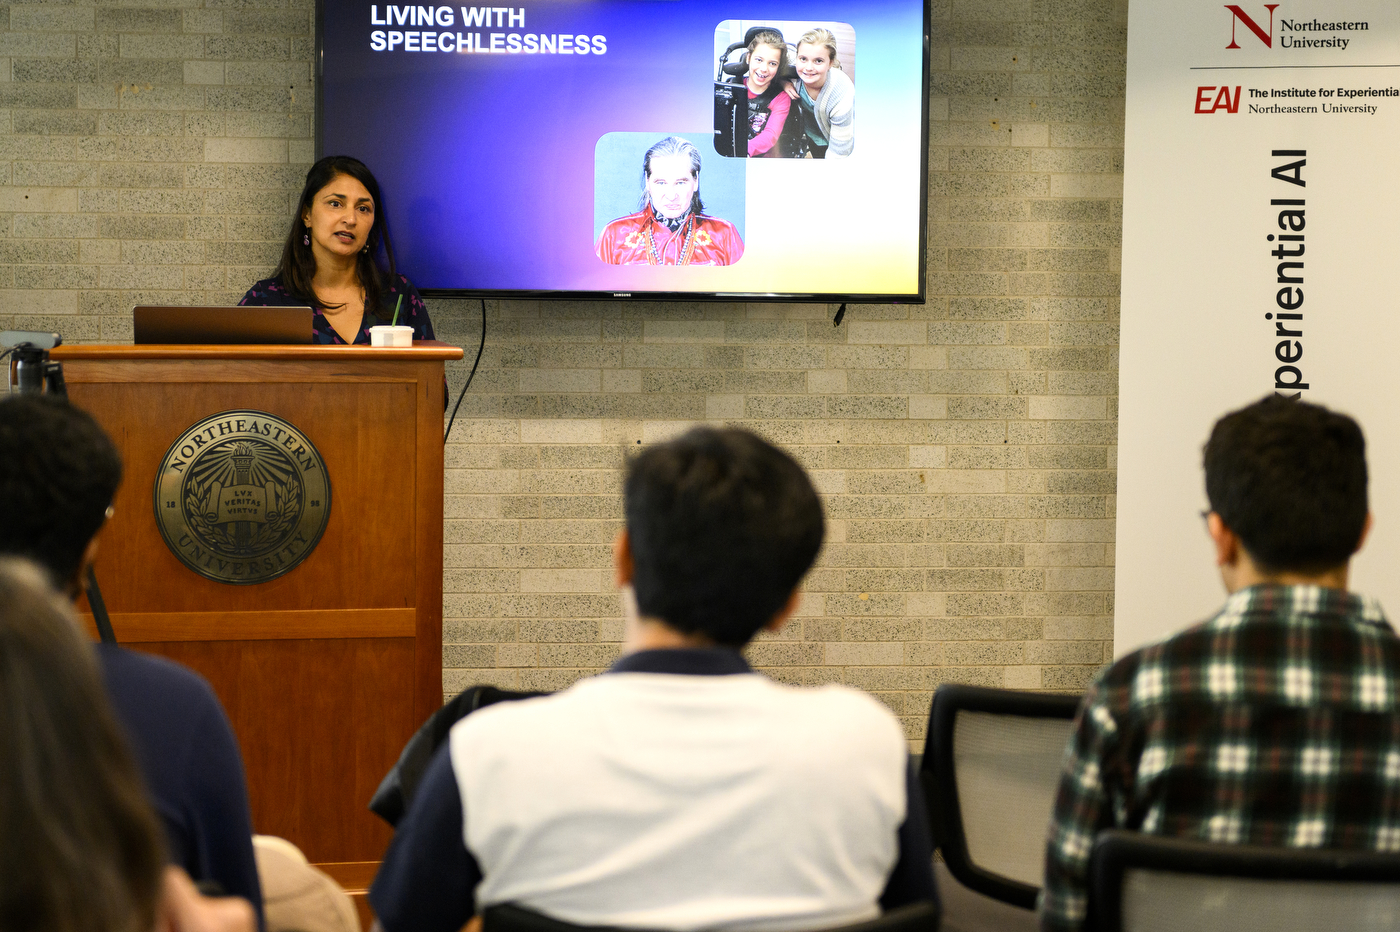 Northeastern researcher Rupal Patel presents a presentation on AI speech synthesis.